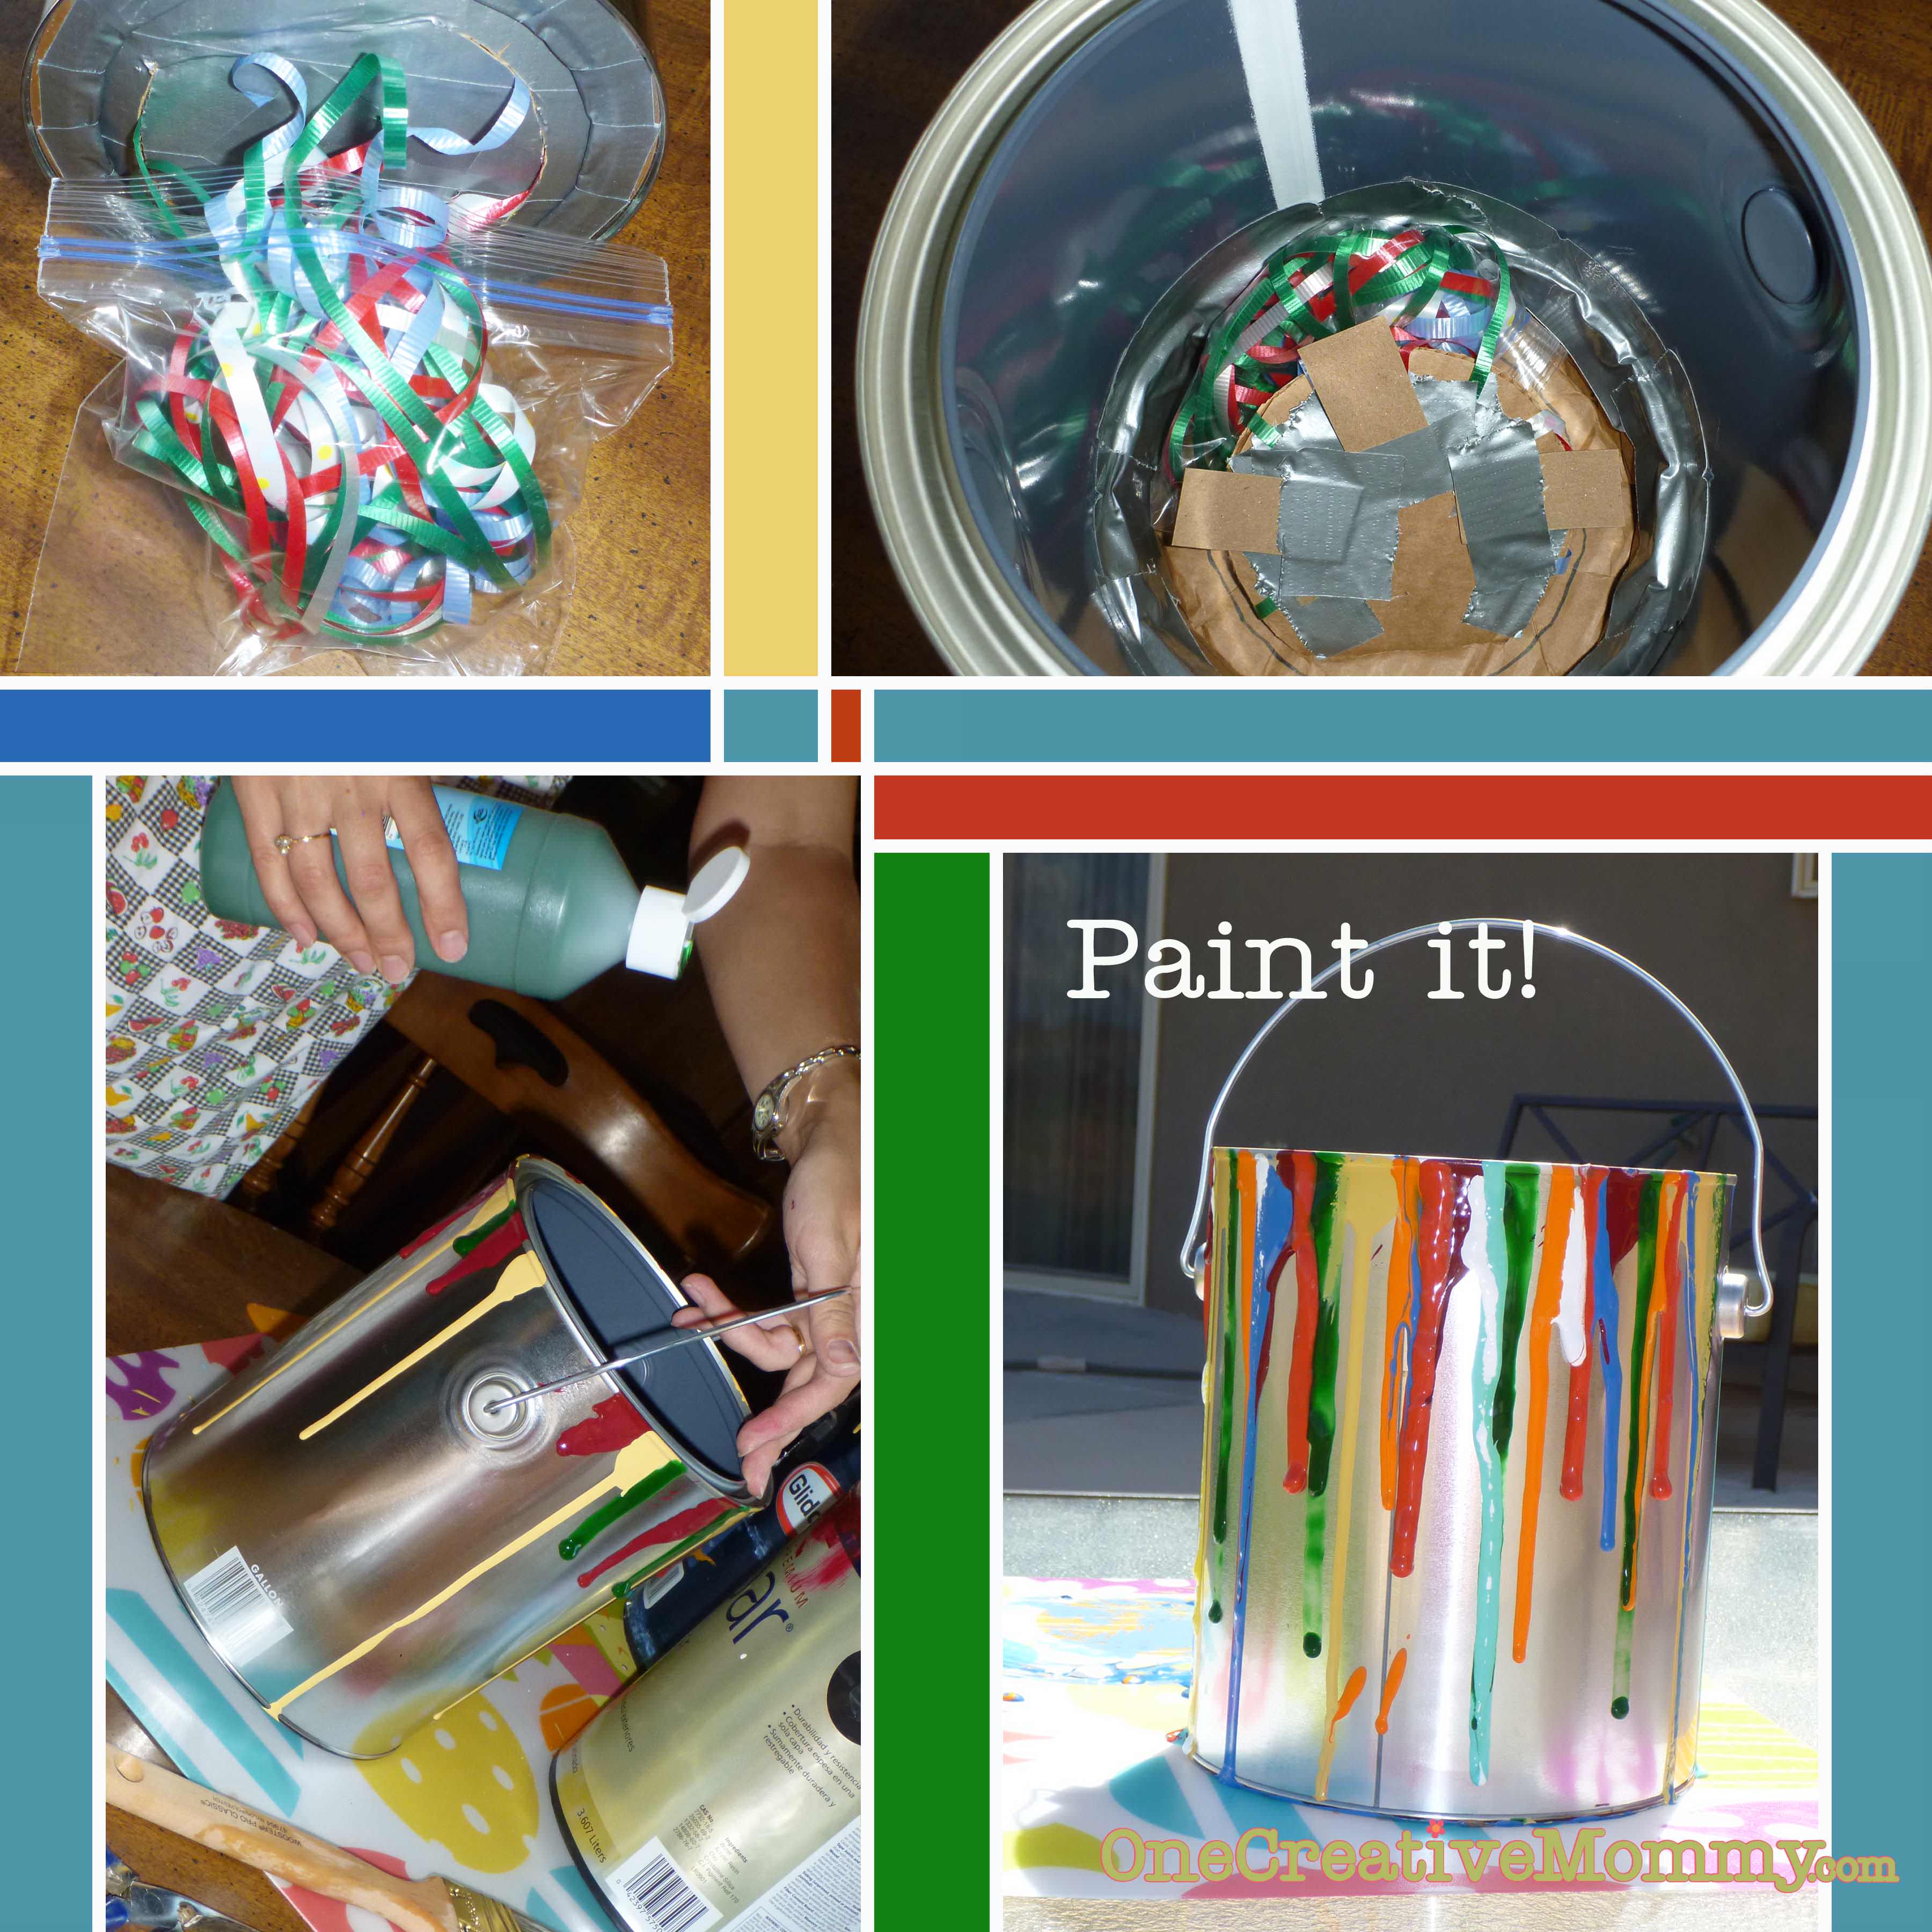 Pull-String} Paint Can Piñata Tutorial 